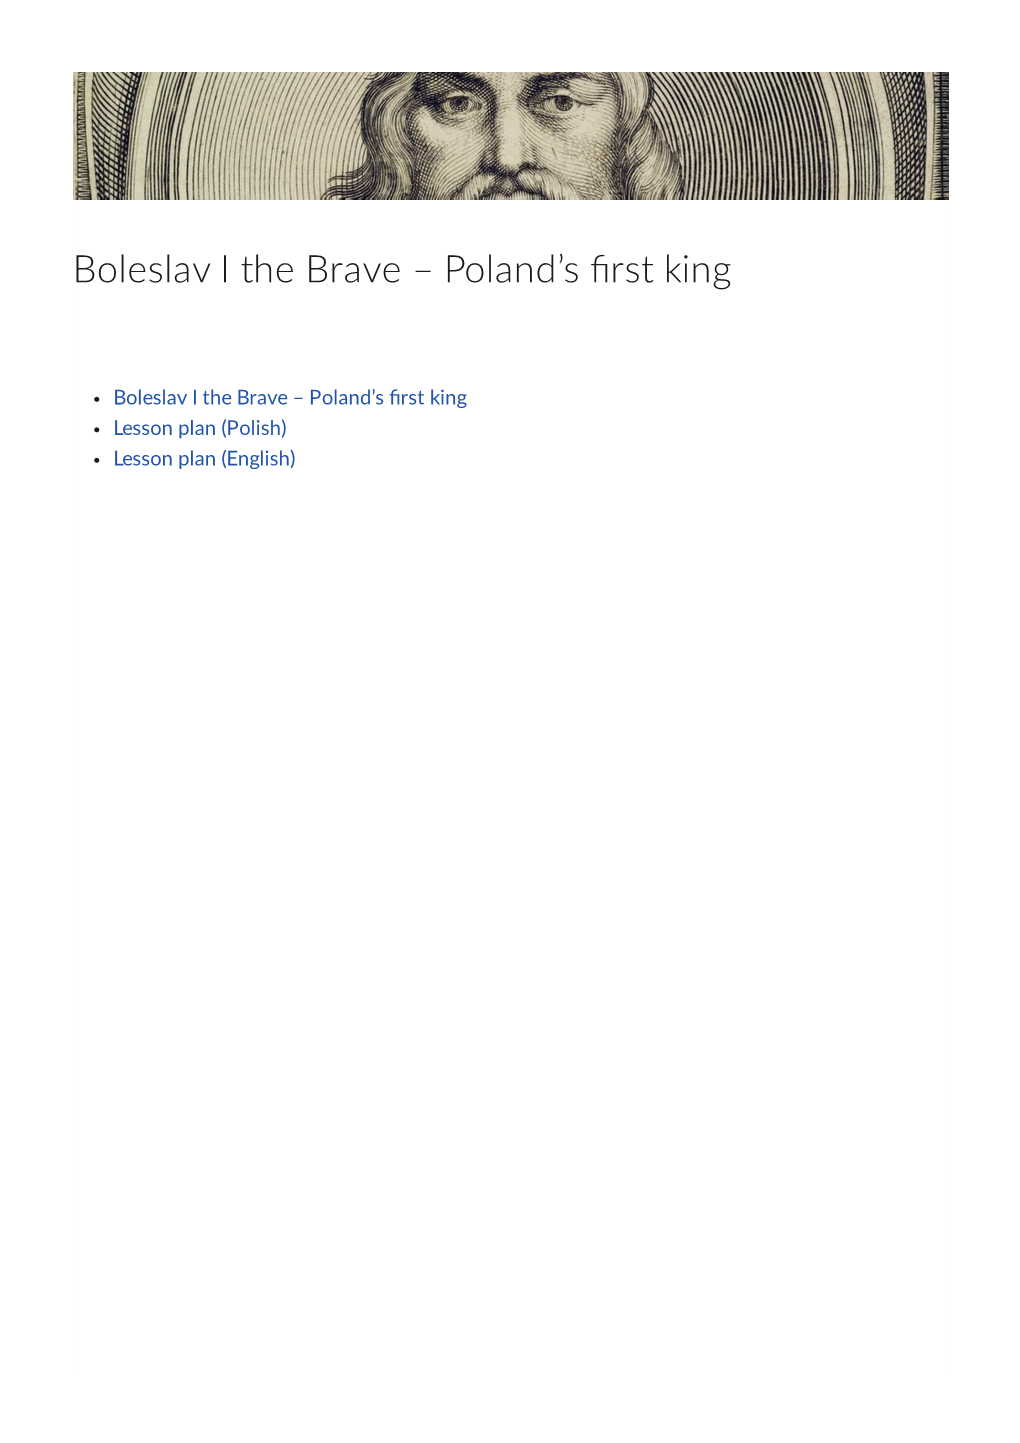 Poland's First King